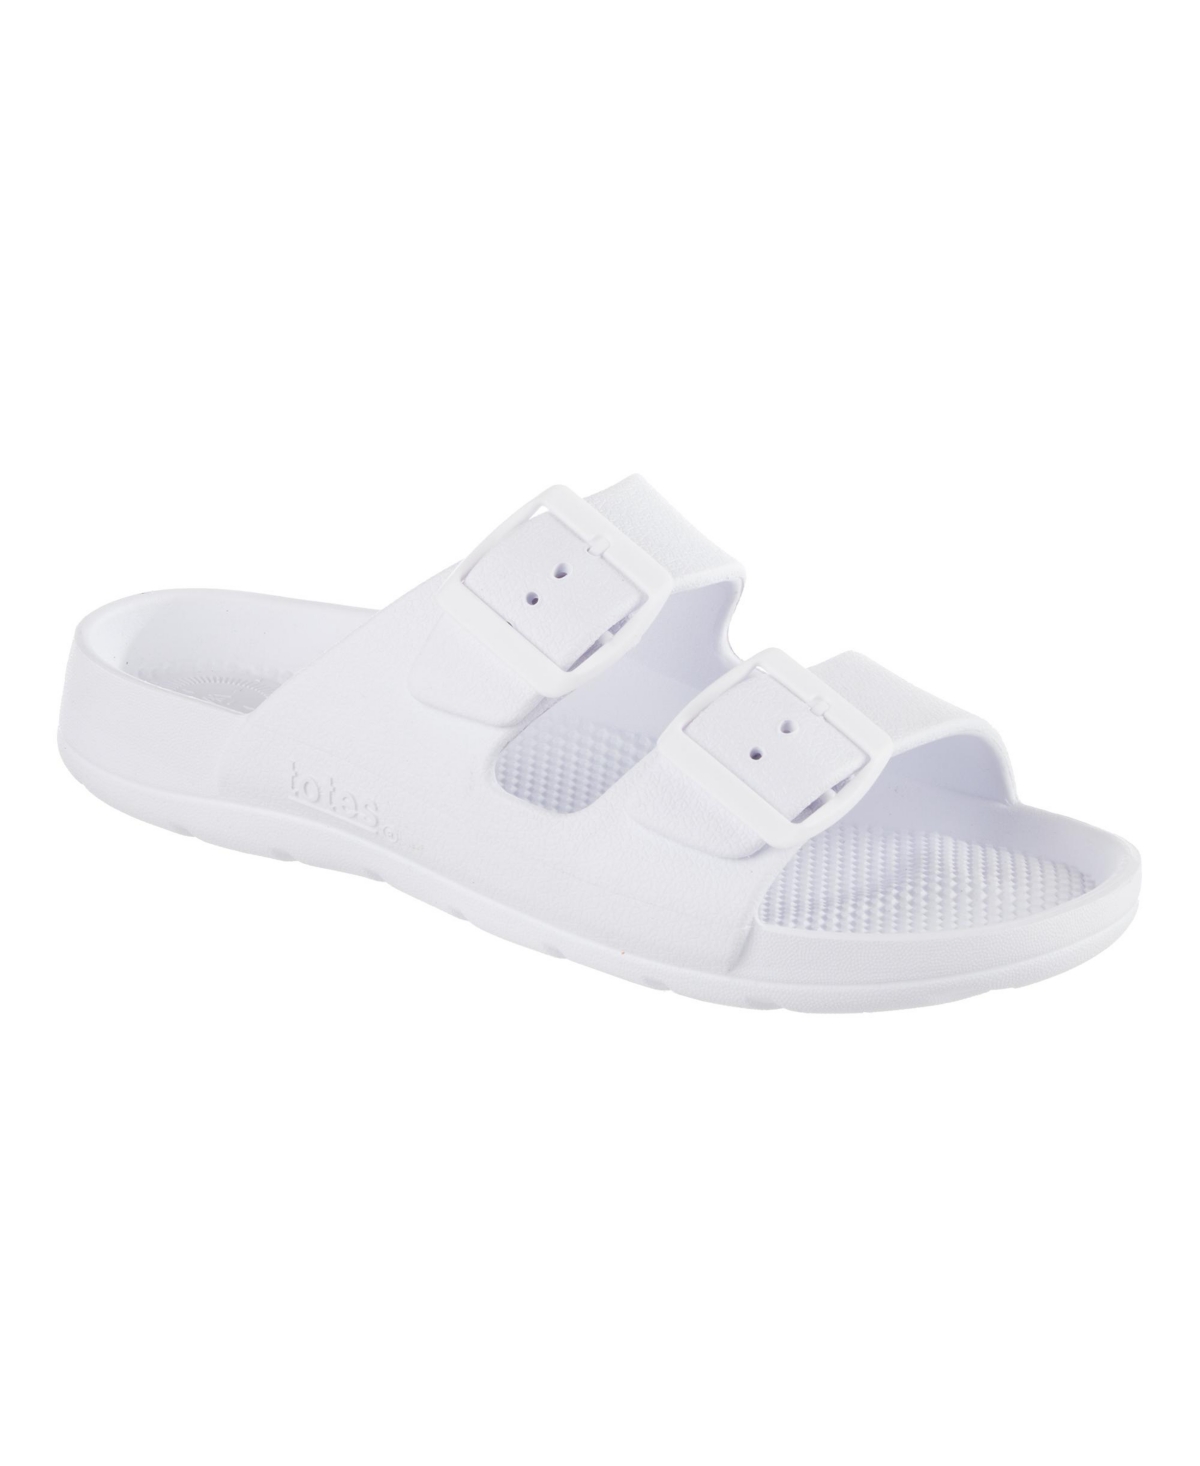 Women's Double Buckle Adjustable Slide with Everywear - White